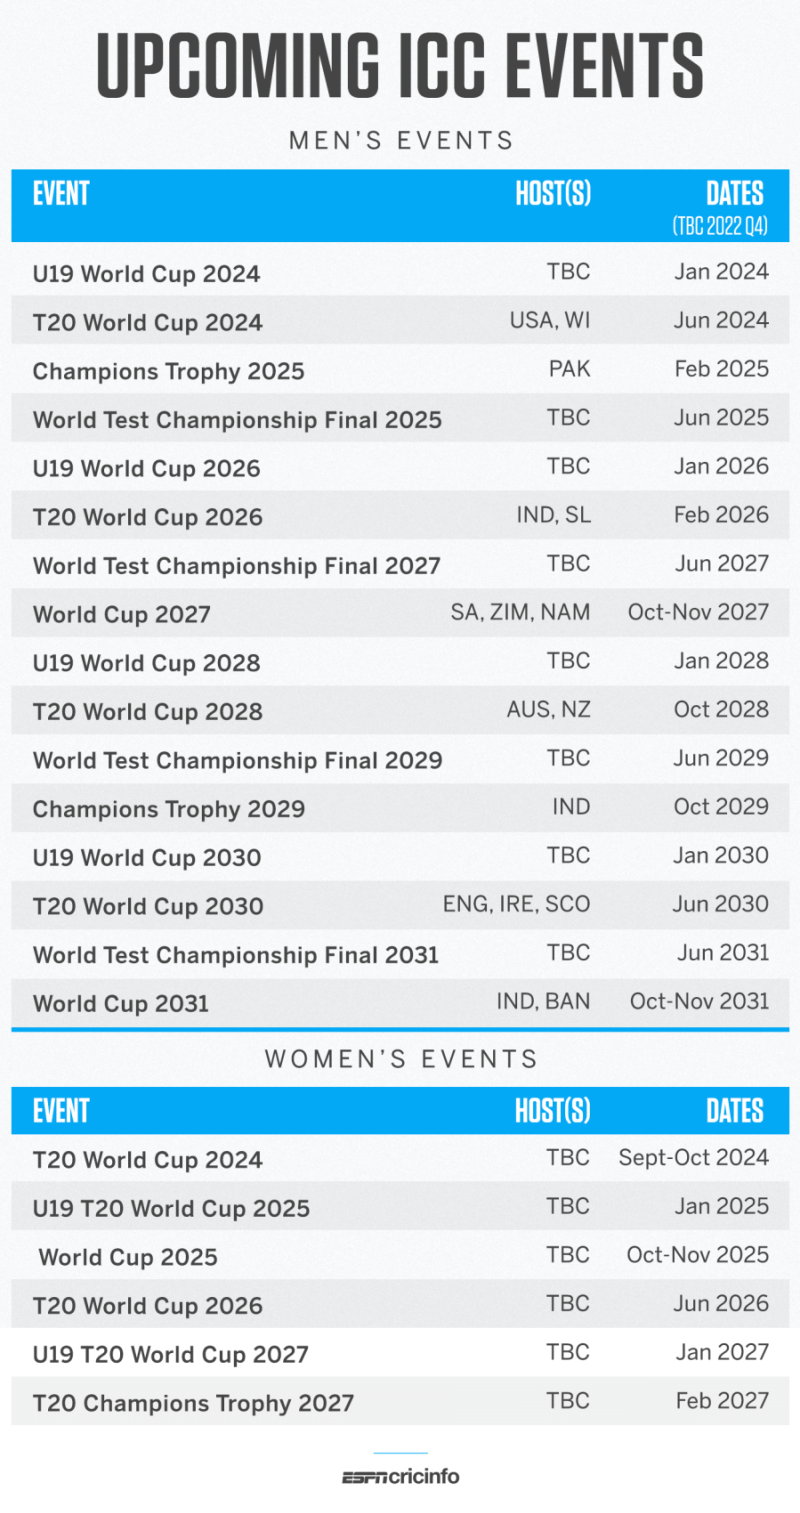 ICC to sell next media rights for Indian market and mens and womens events separately ESPNcricinfo